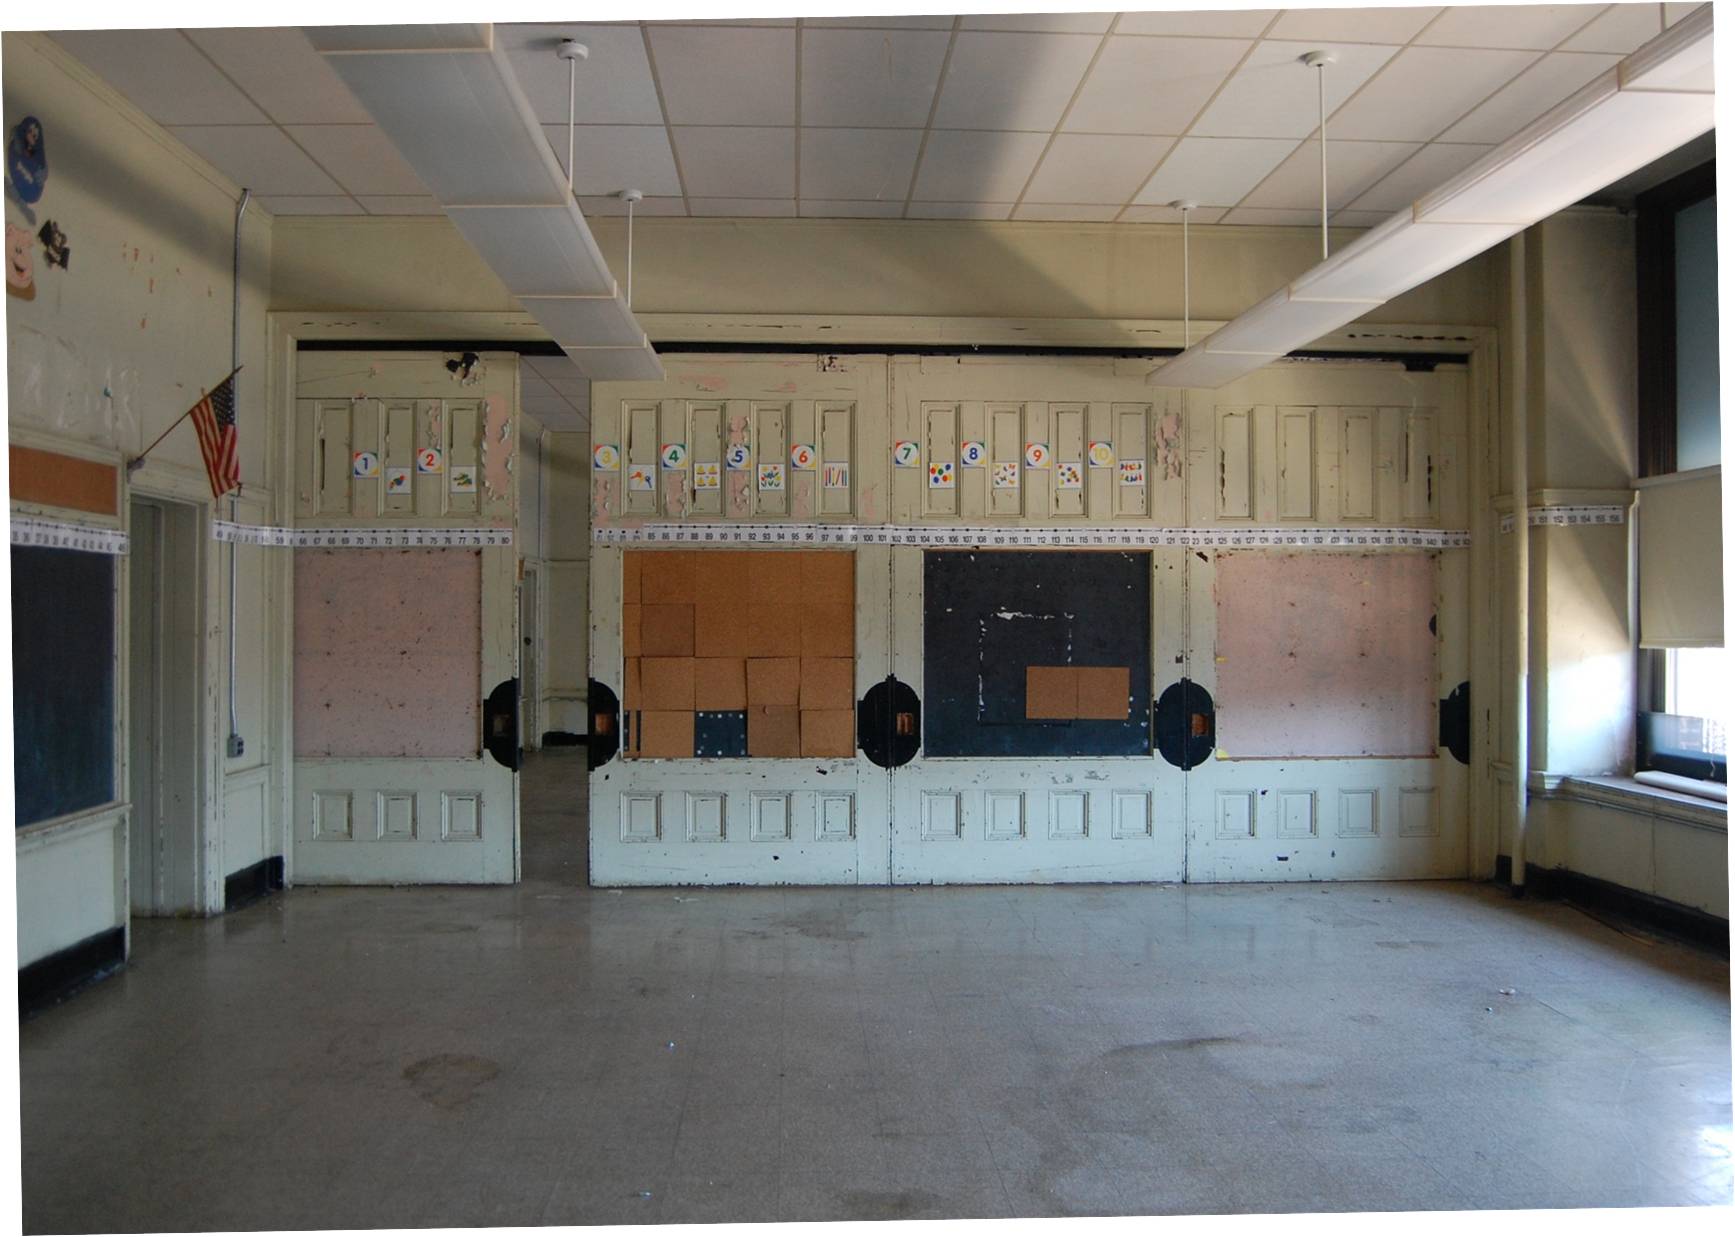 Old Frances Willard School still has classic millwork like these sliding partitions | courtesy of Community Design Collaborative